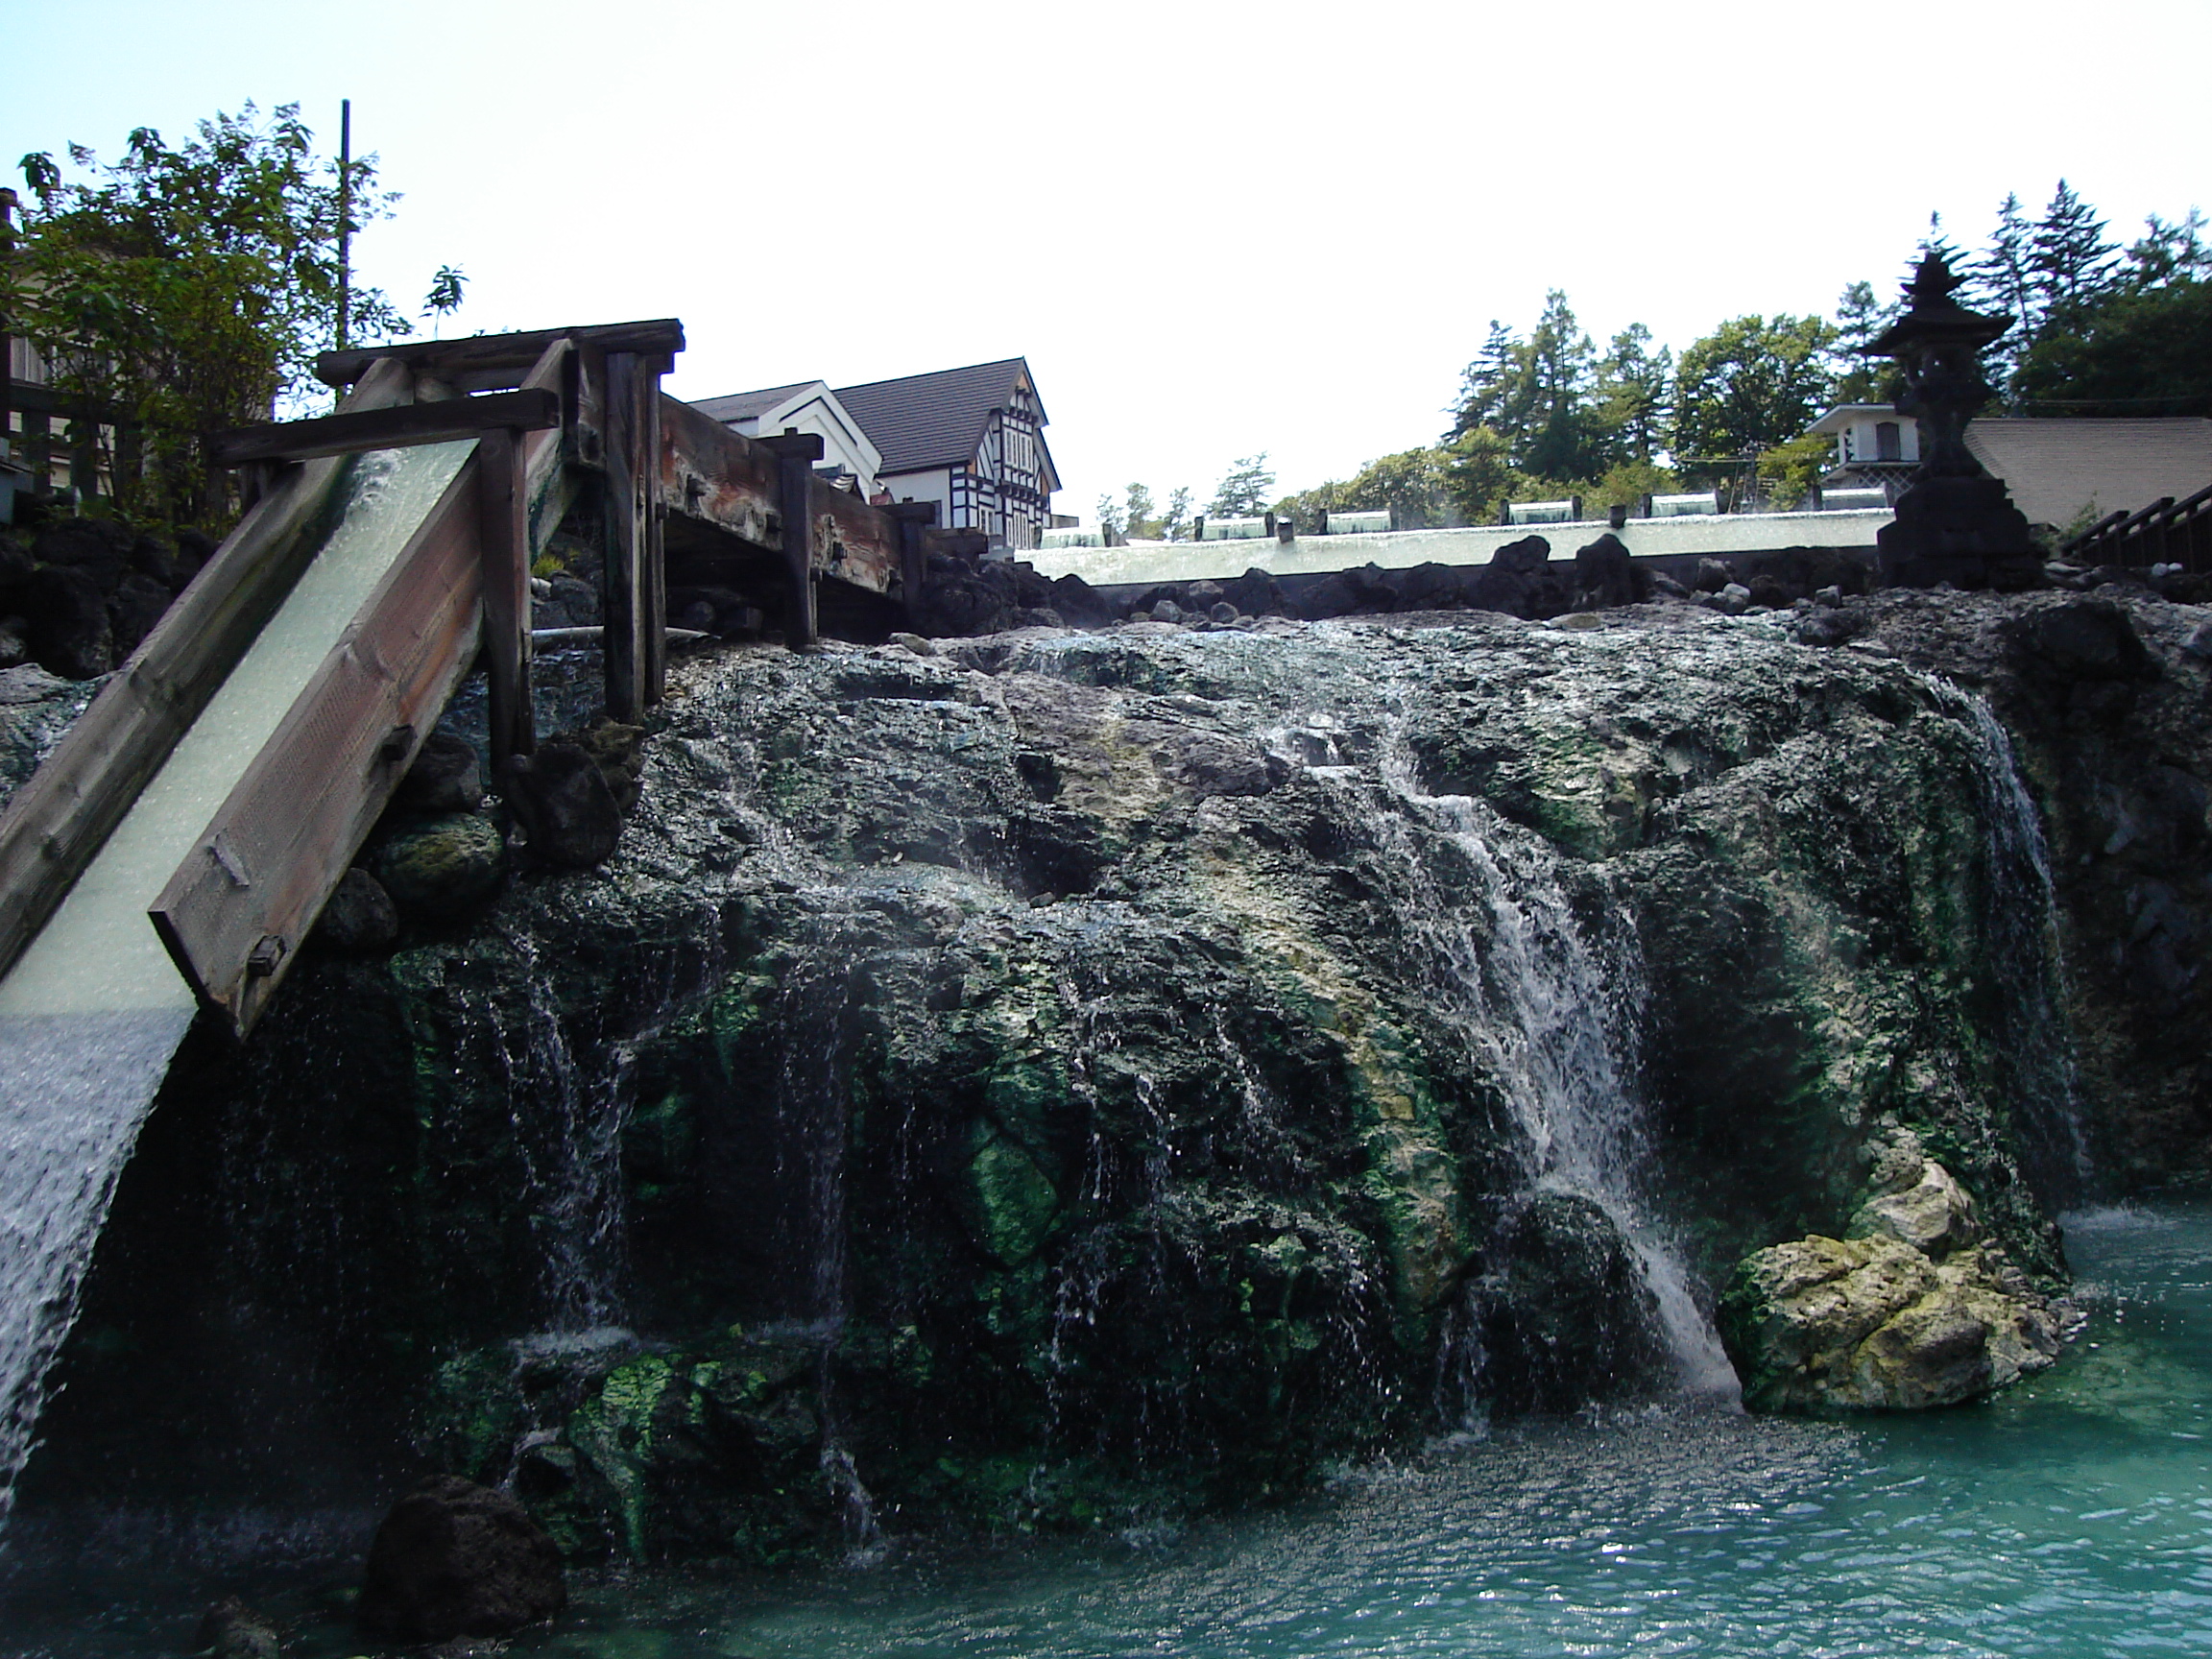 water cascading down a sluice to a lower area